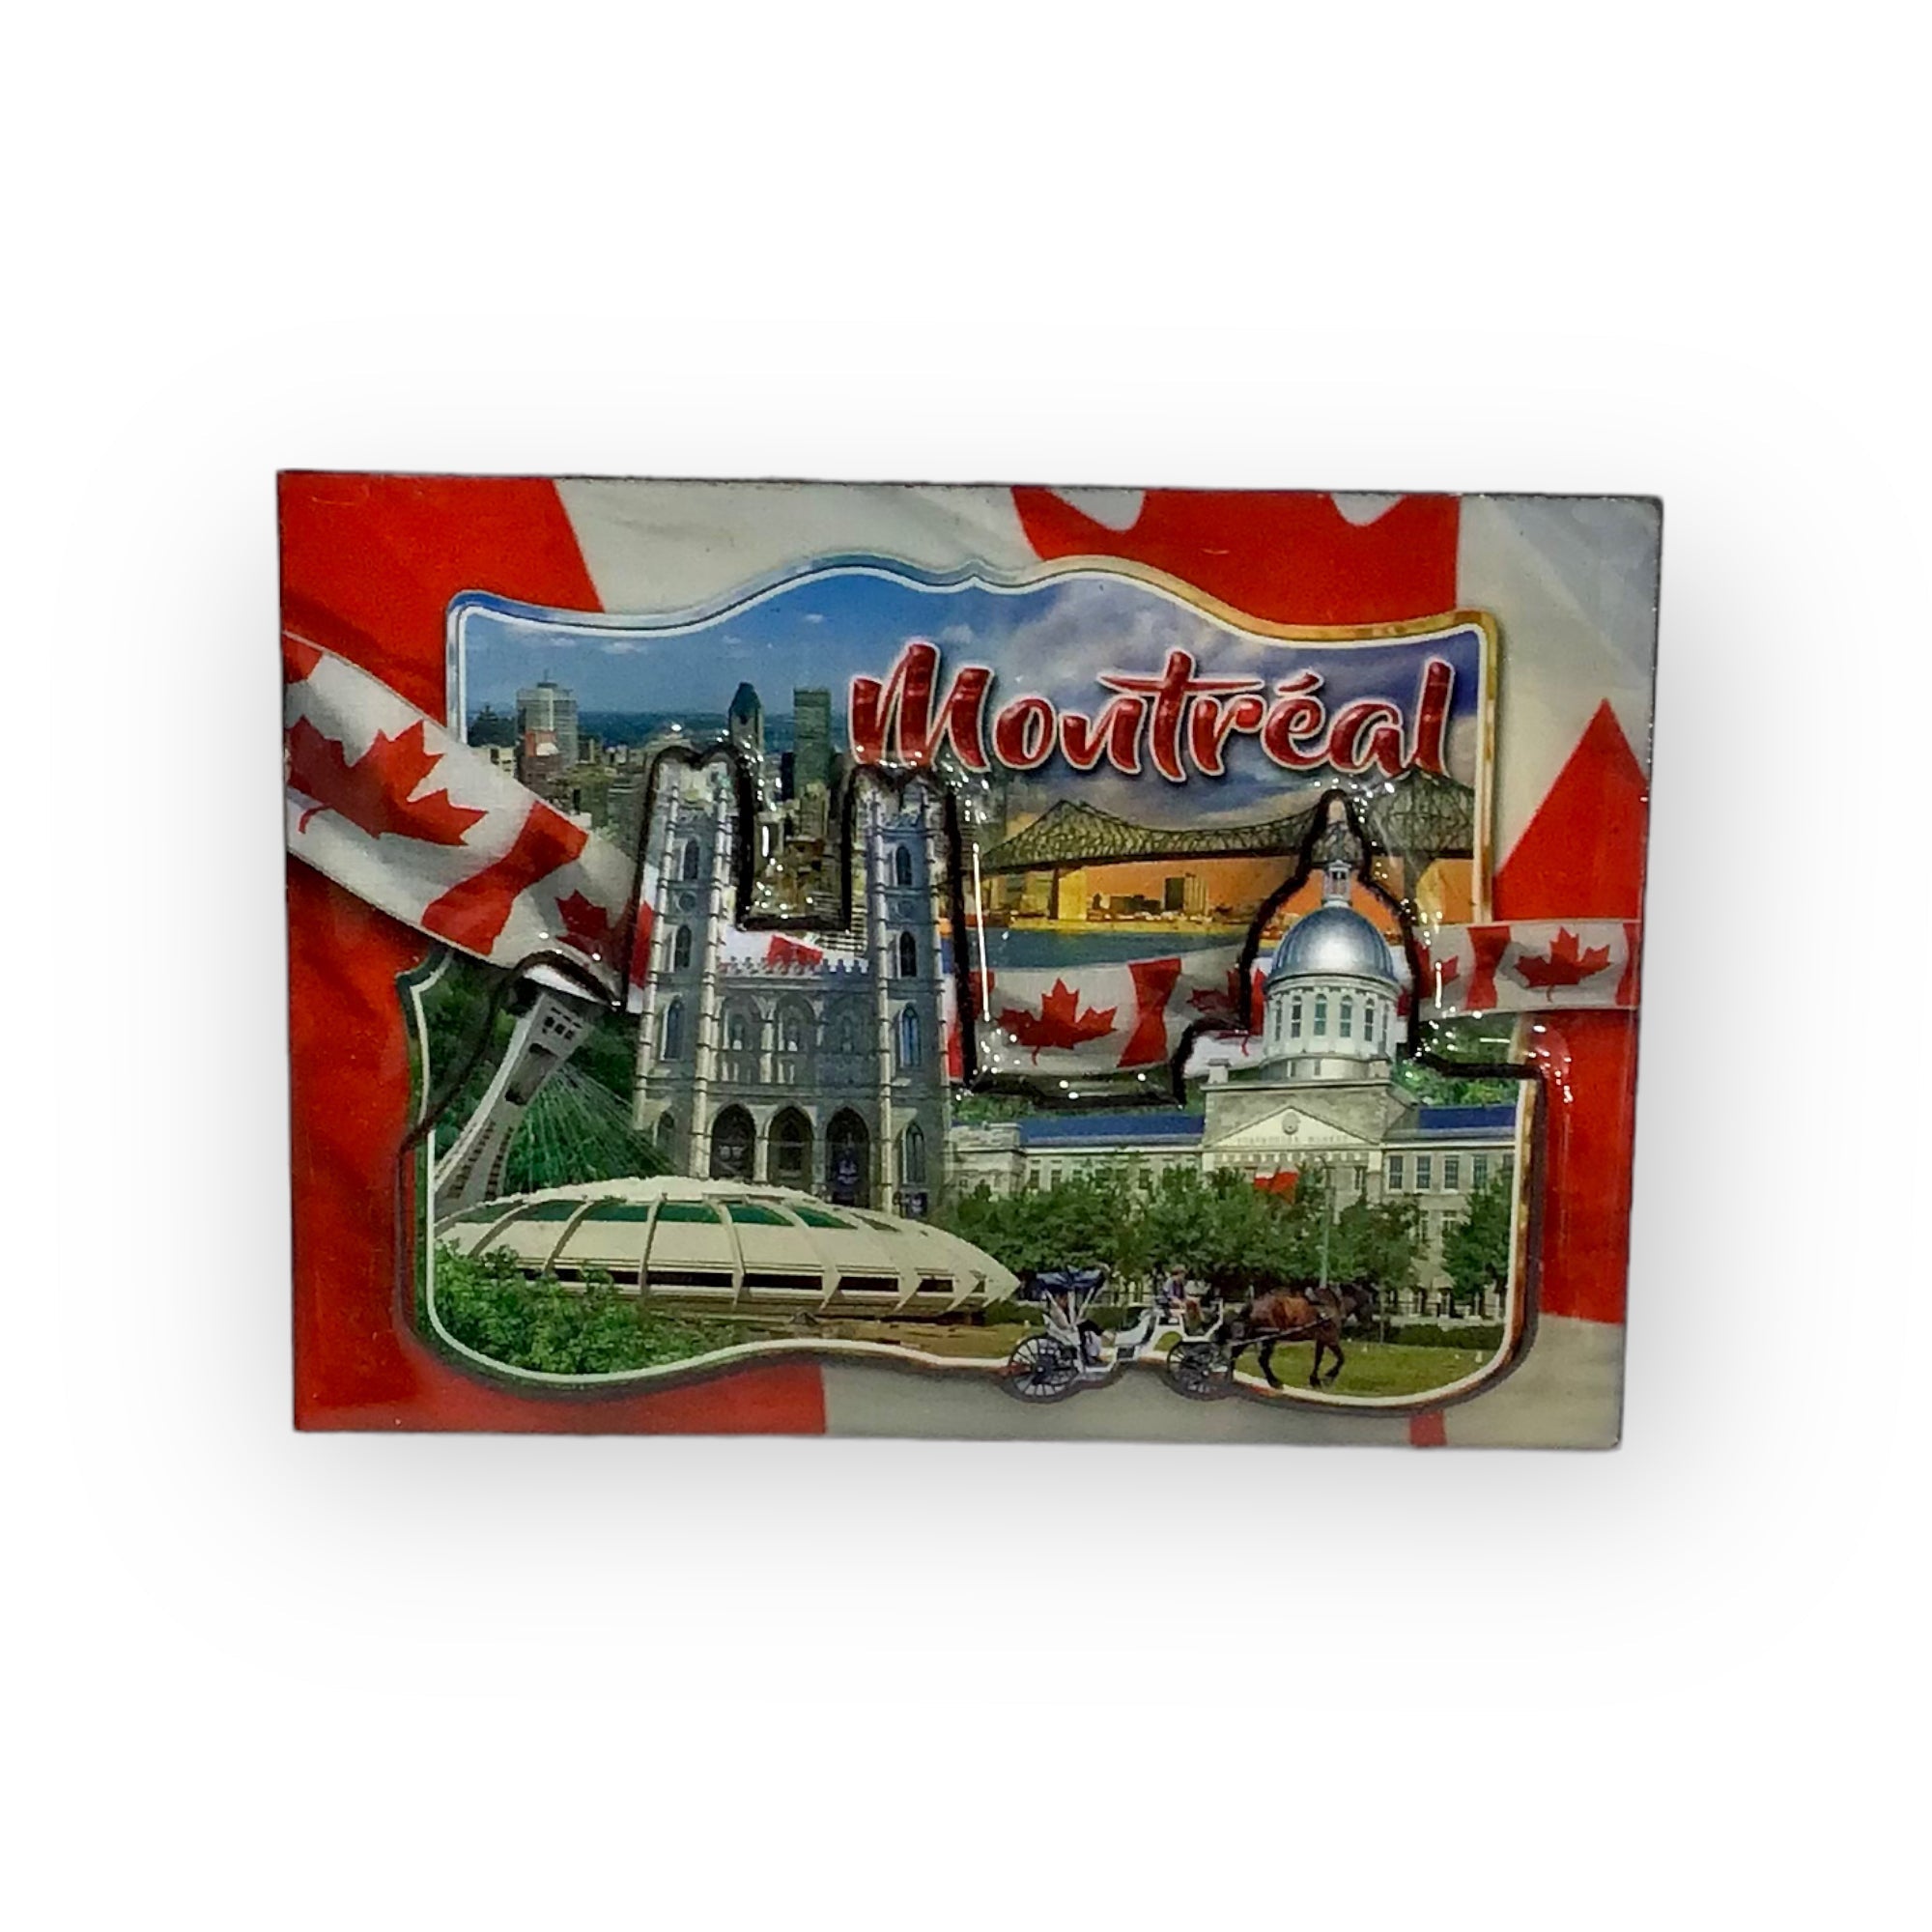 MONTREAL FAMOUS SCENIC PICTURED WOOD FRIDGE MAGNET EPOXY FINISHED